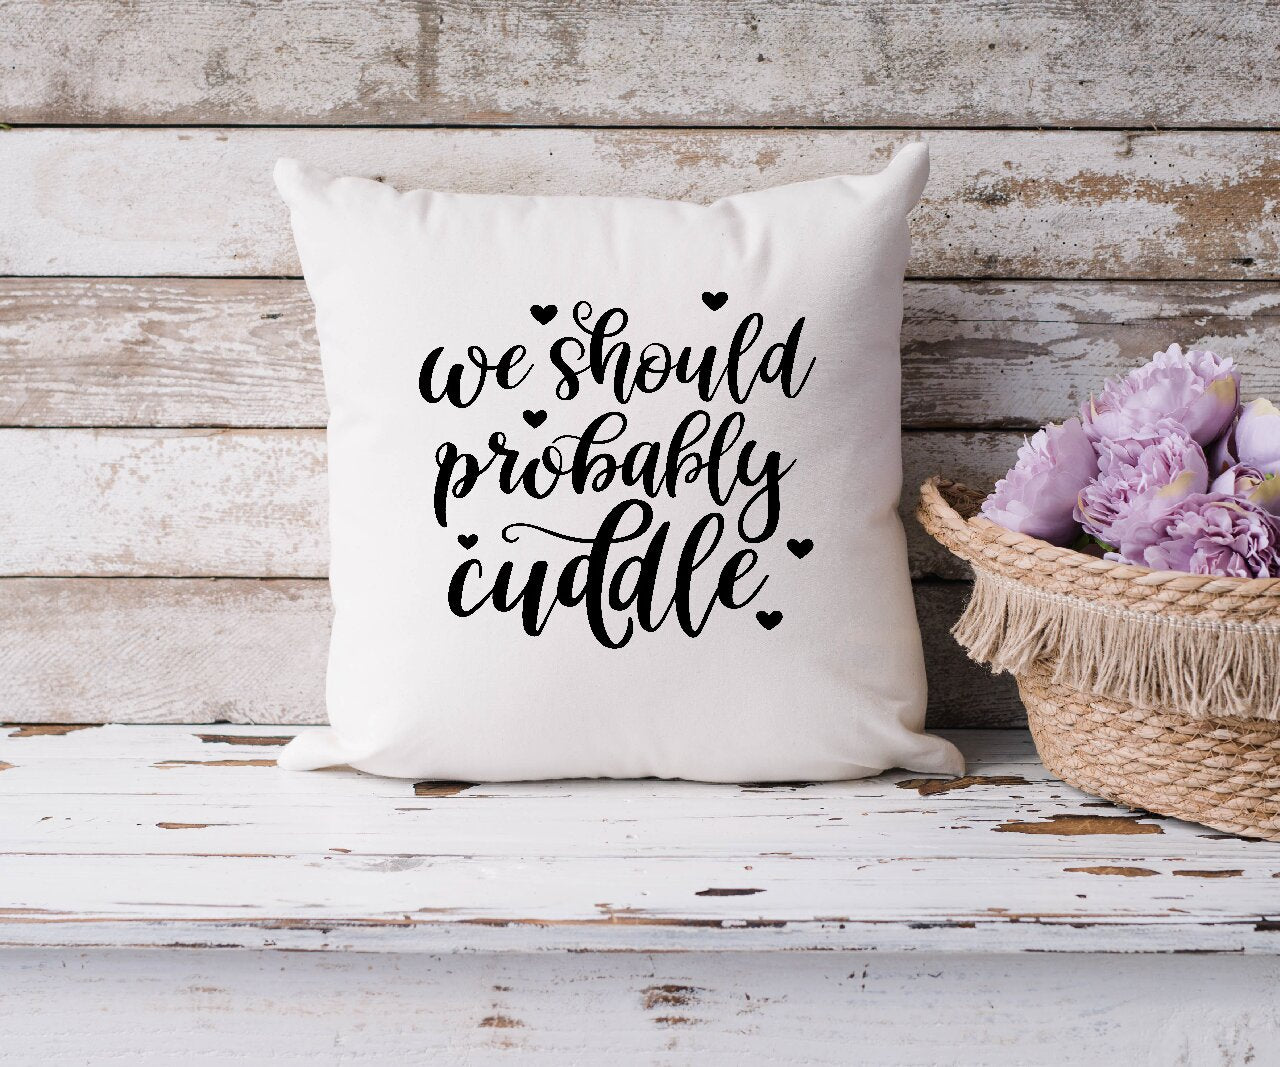 We Should Probably Cuddle - Cushion Cover